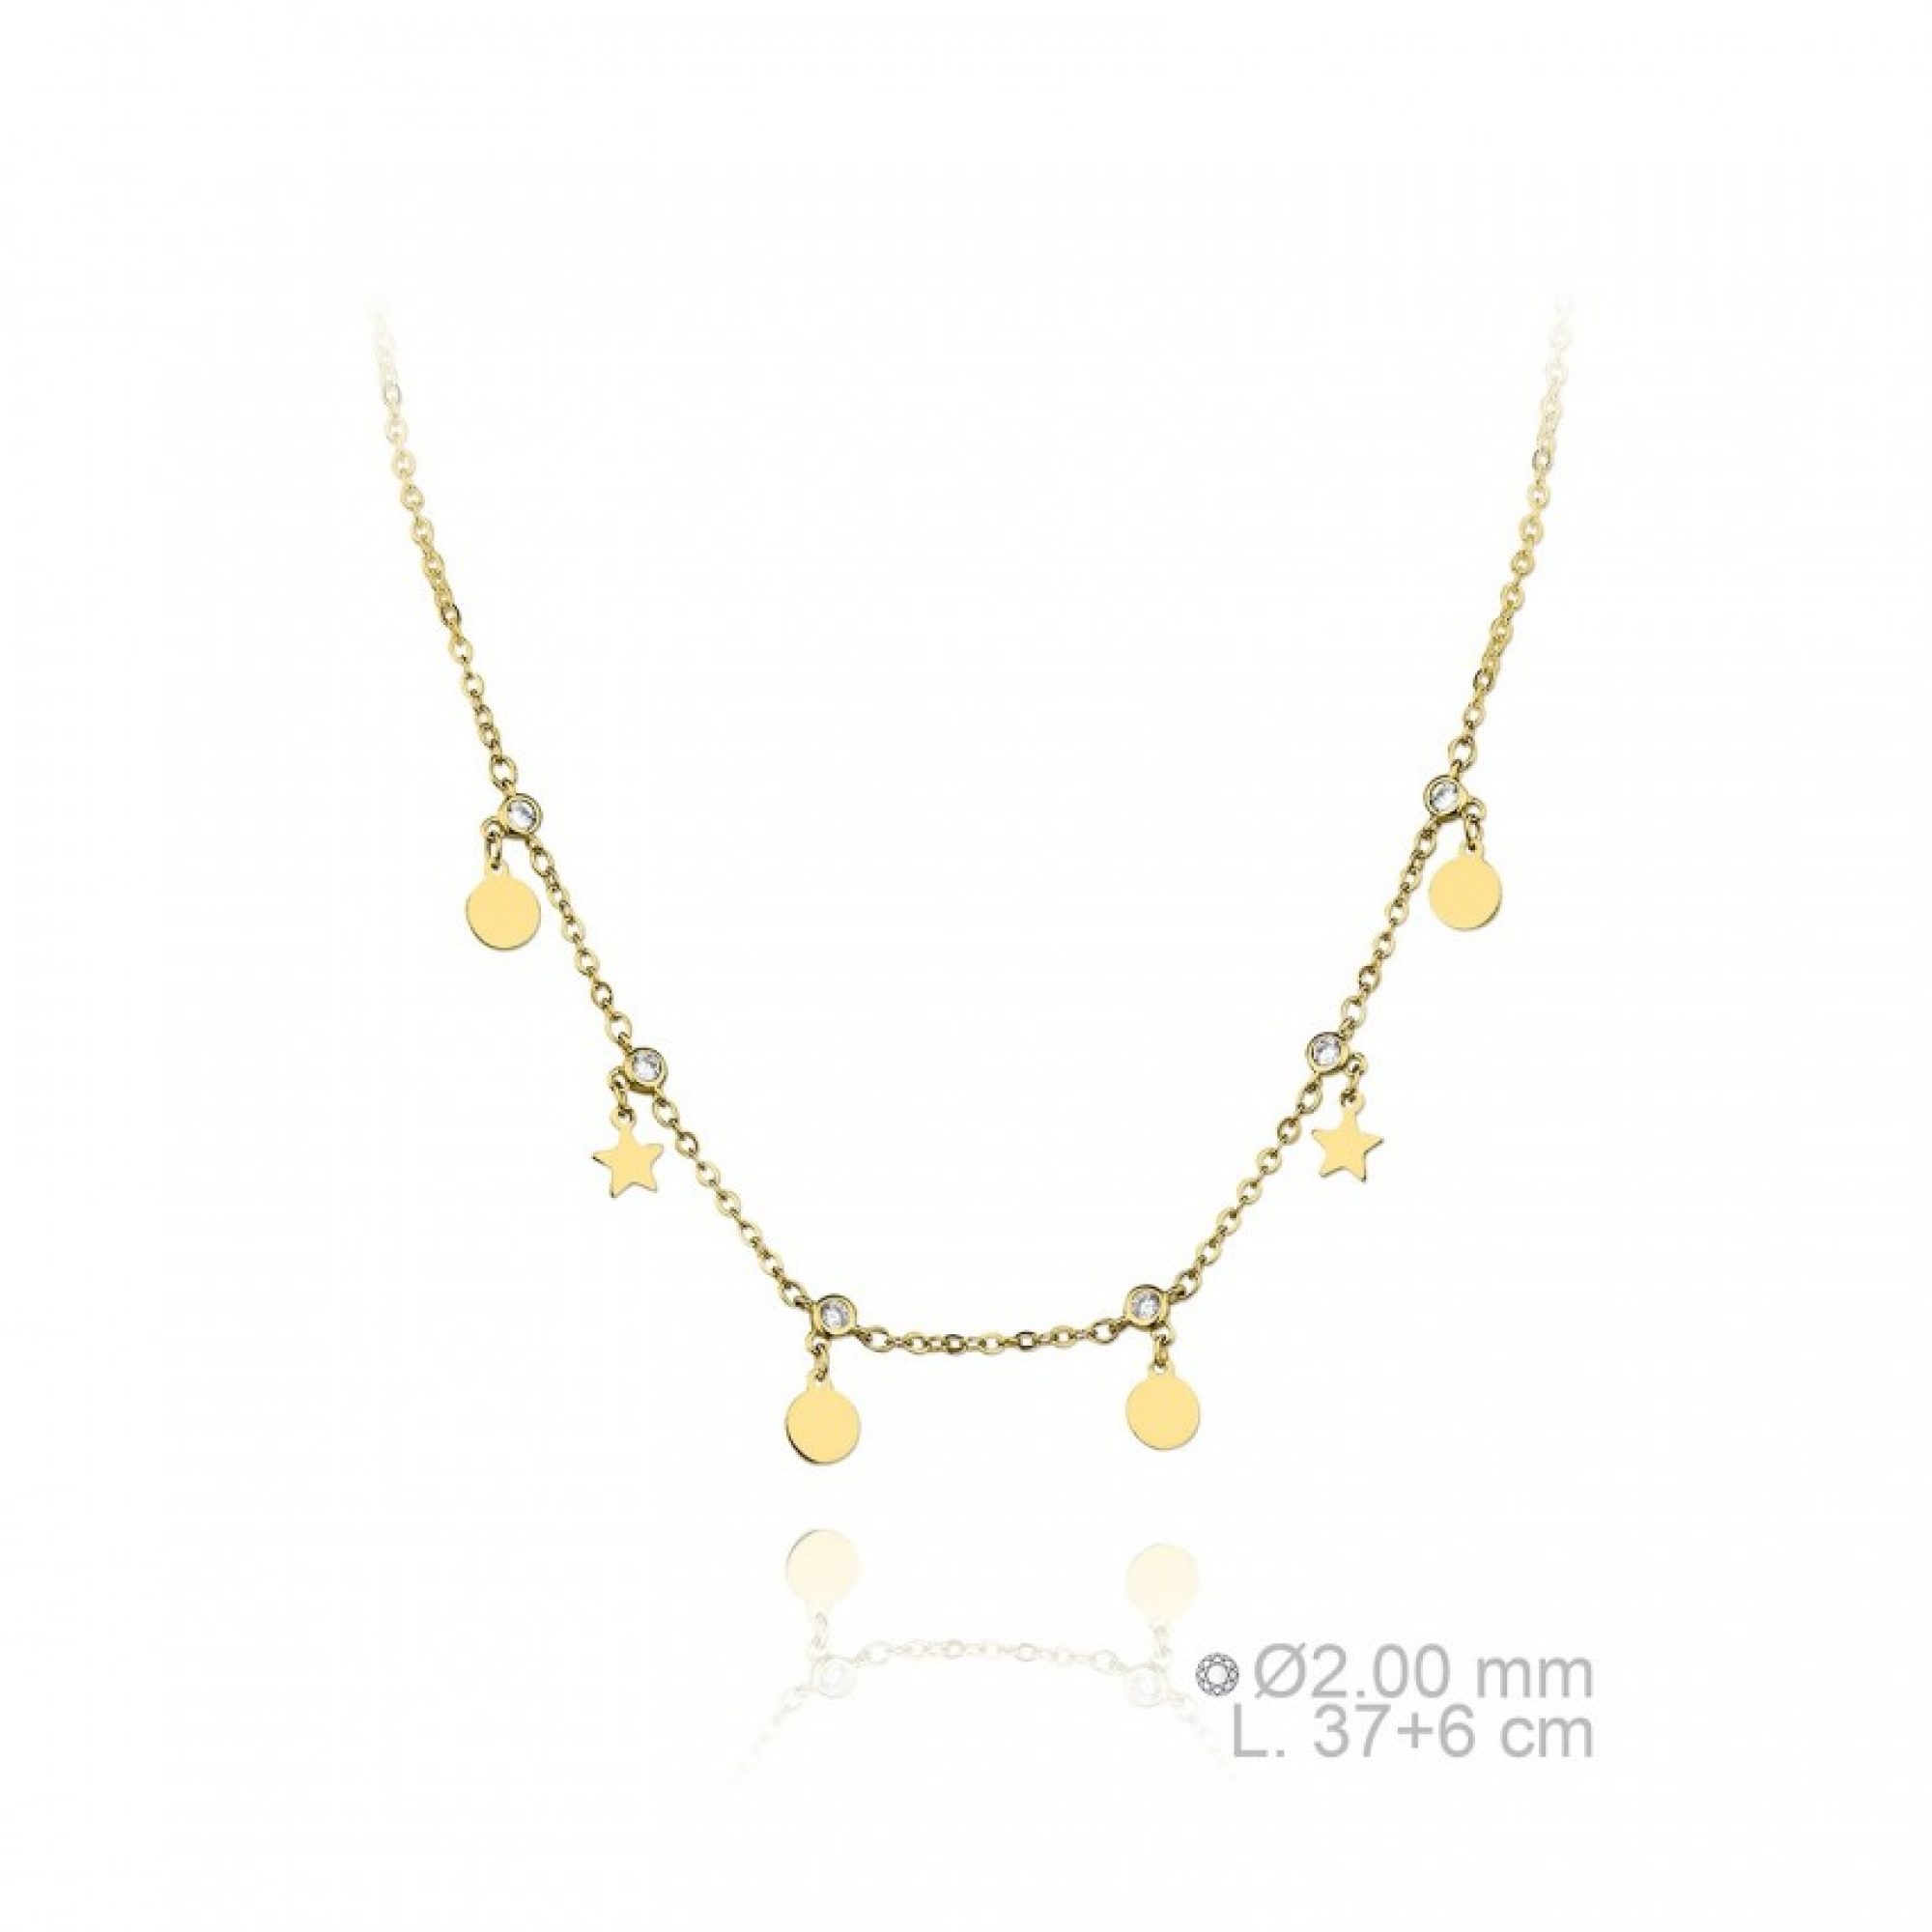 Gold plated dangle necklace with zircon stones